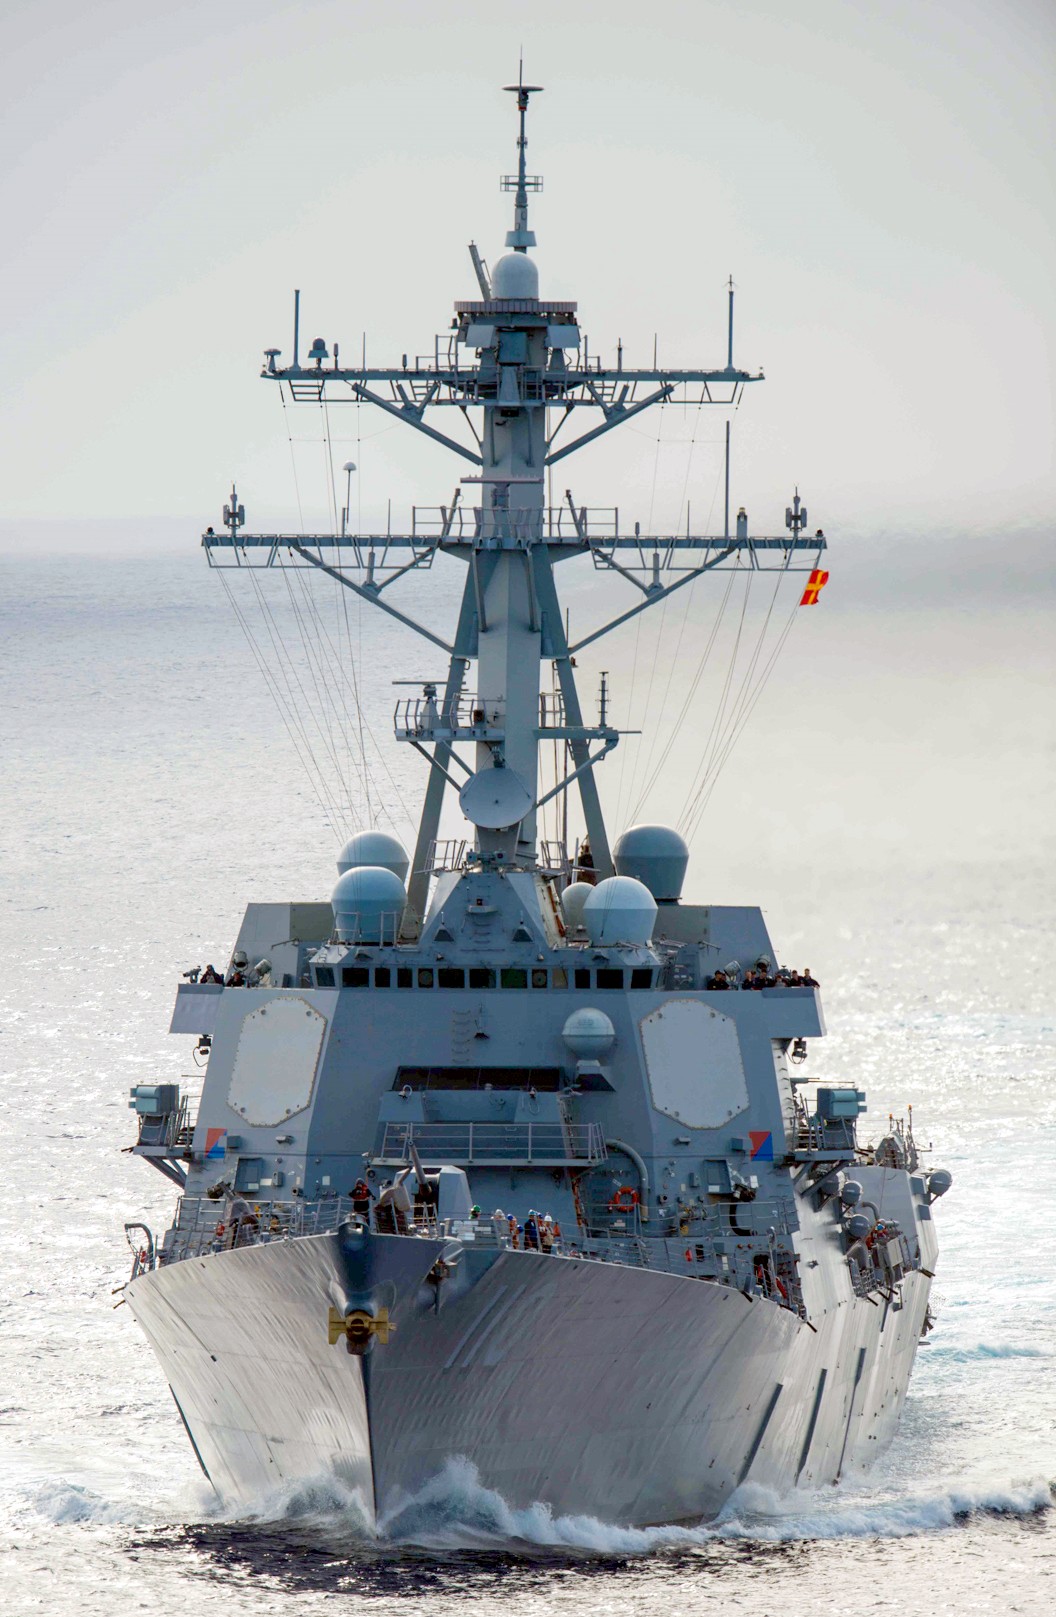 ddg-110 uss william p. lawrence arleigh burke class guided missile destroyer aegis us navy 18p